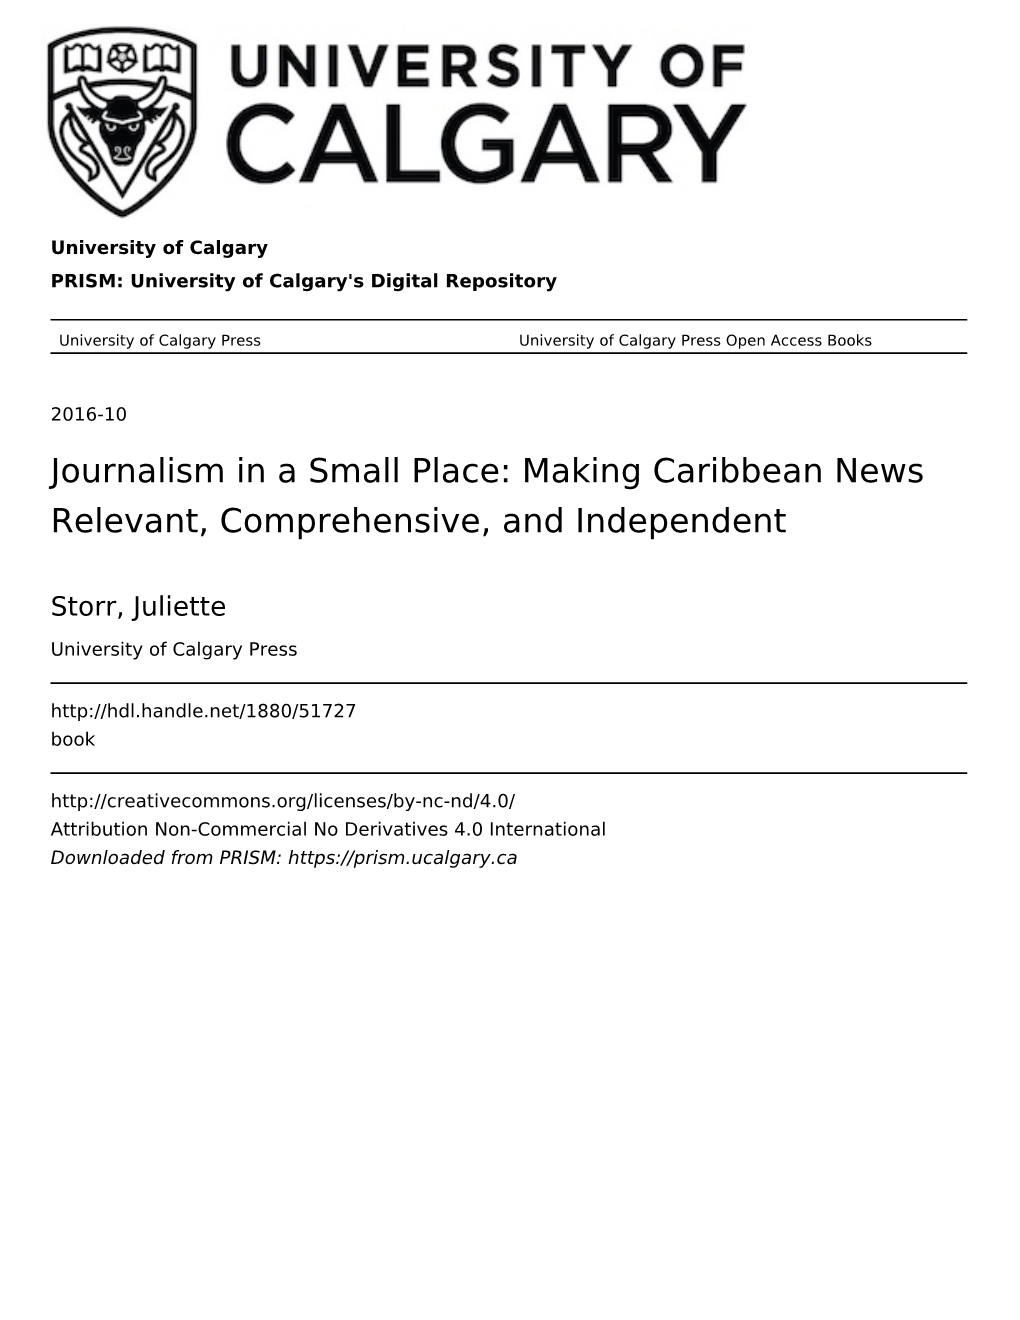 Journalism in a Small Place: Making Caribbean News Relevant, Comprehensive, and Independent